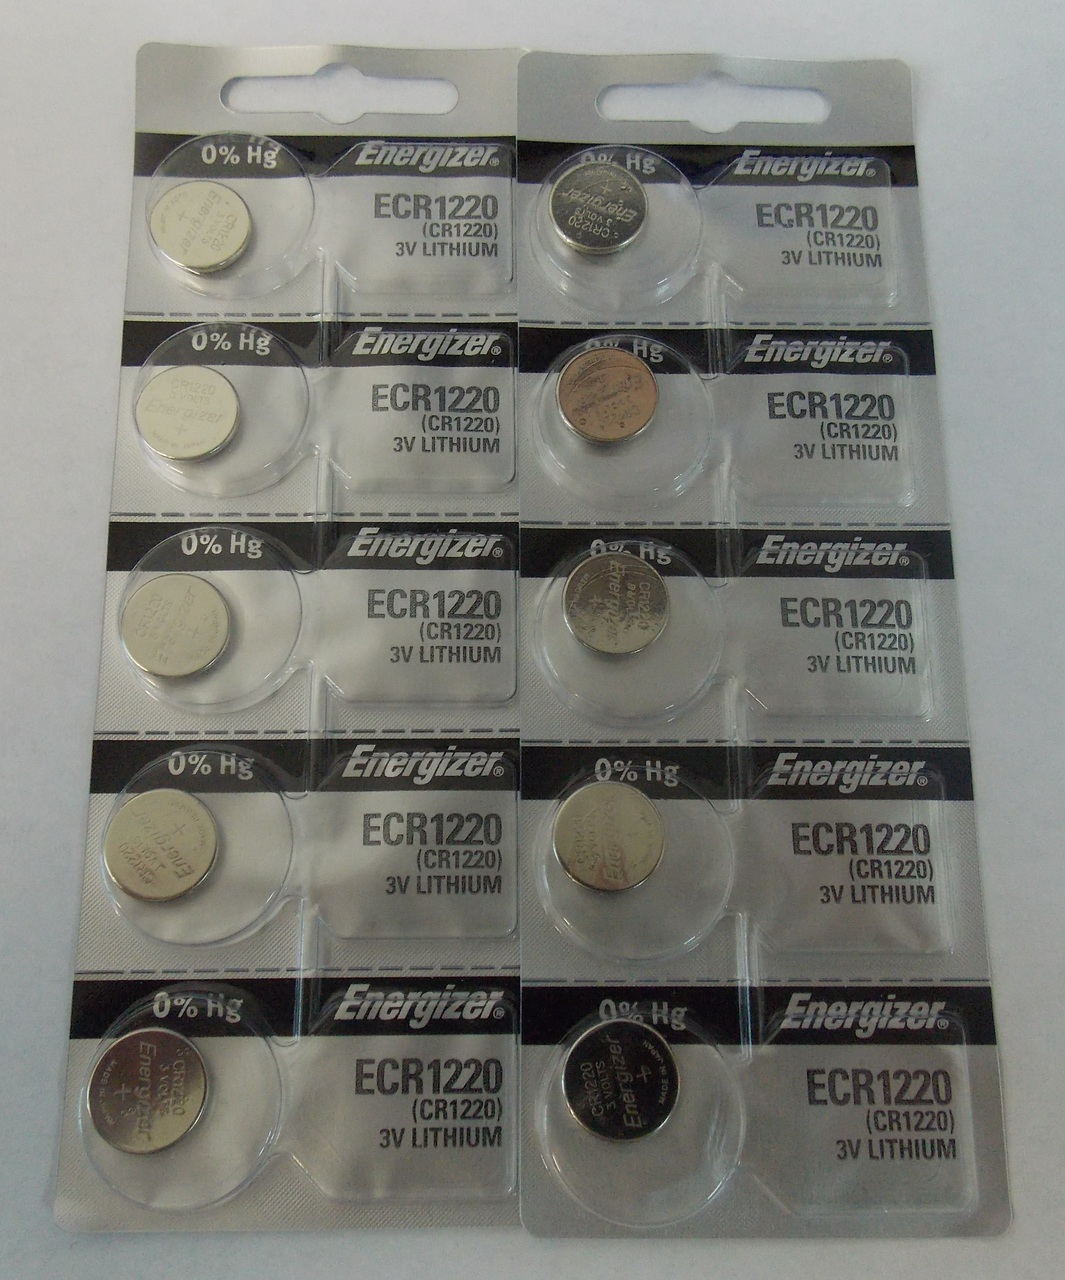 Energizer CR1220 3V Lithium Coin Battery - 10 Pack + FREE SHIPPING!